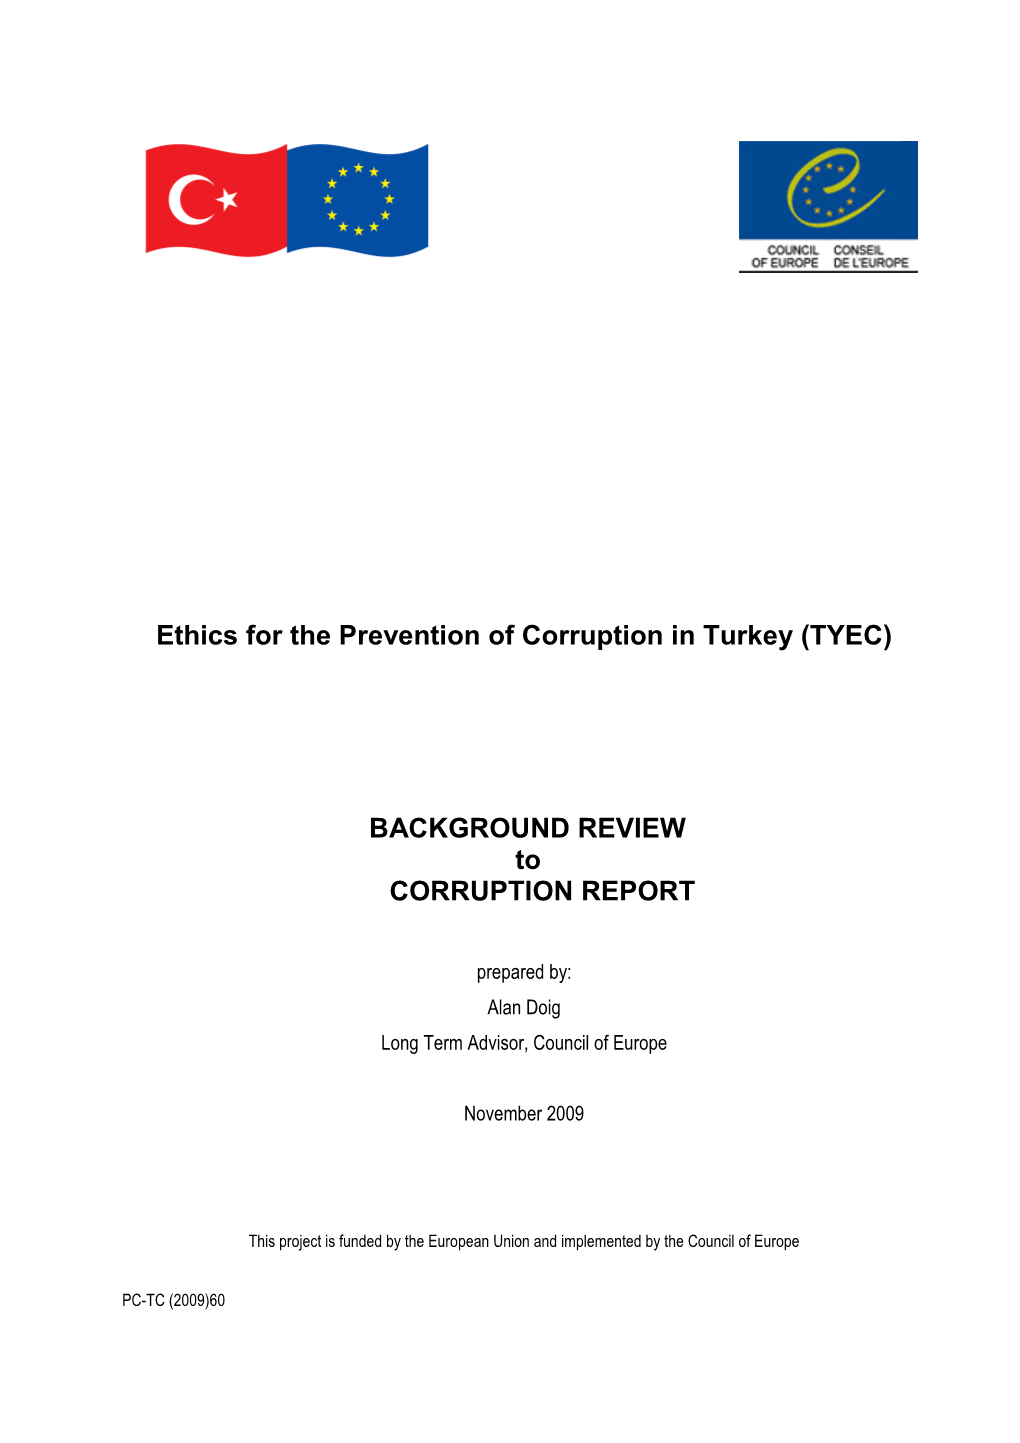 Ethics for the Prevention of Corruption in Turkey (TYEC)